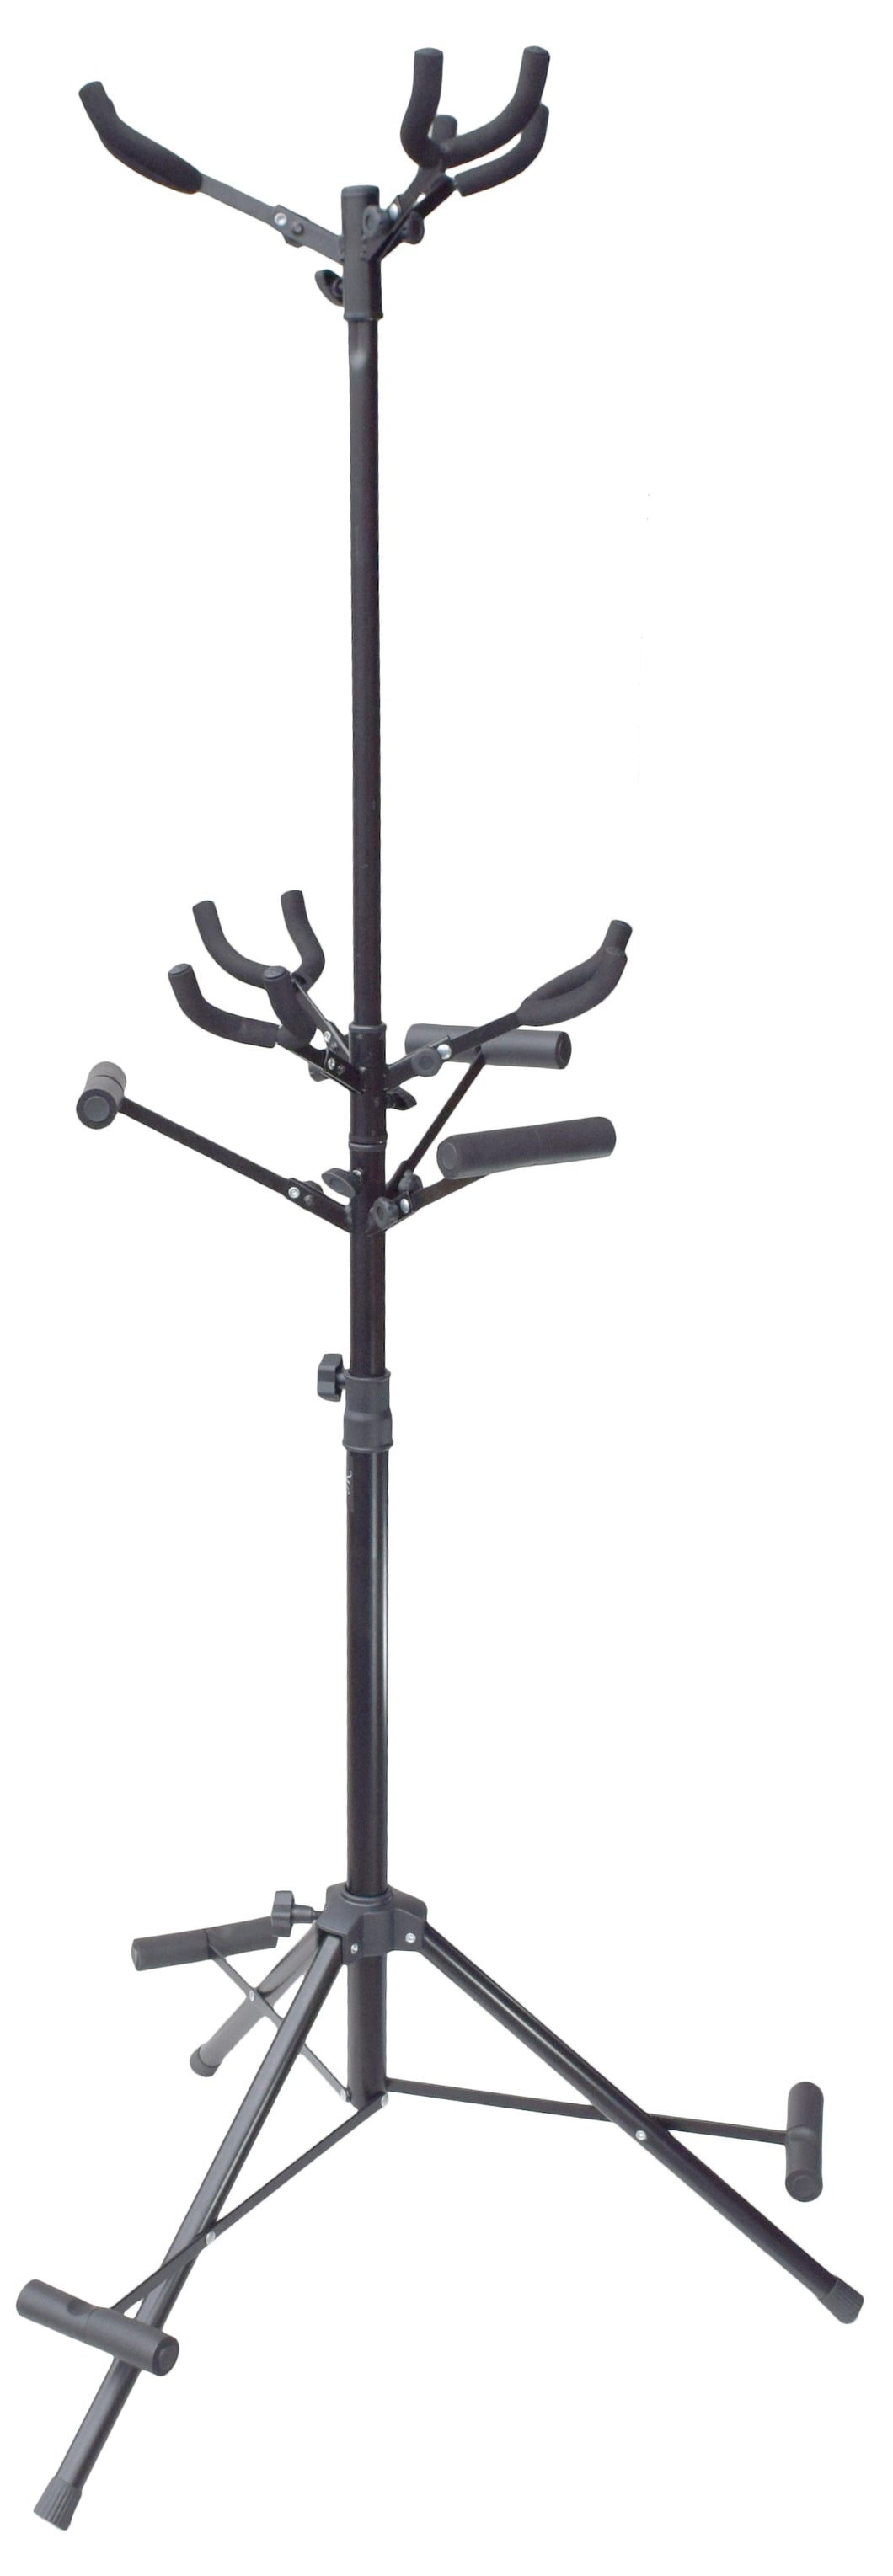 FOLDABLE TREE STAND FOR 6 GUITARS - BLACK